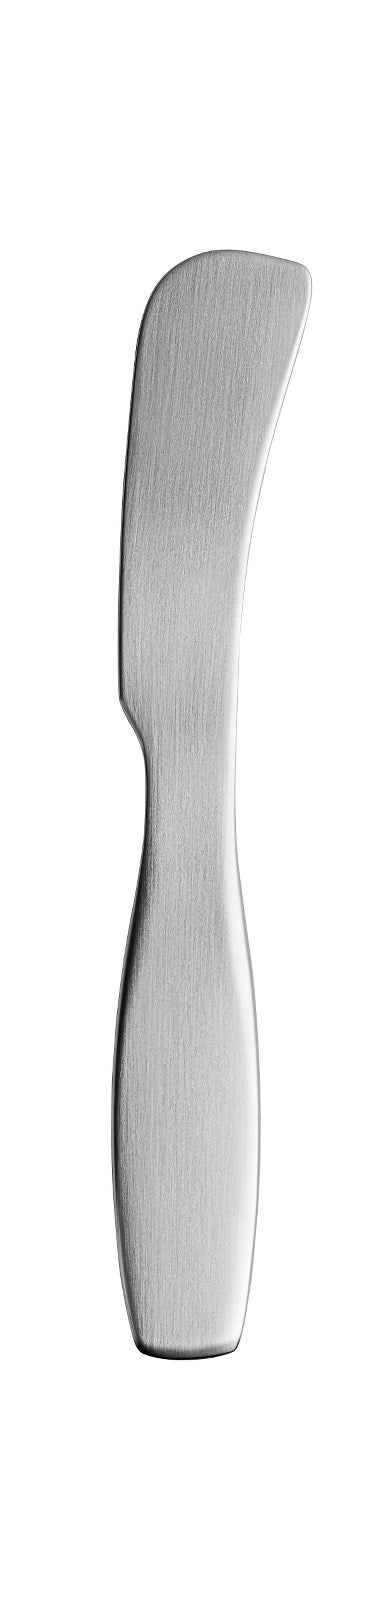 product image for Collective Tools Flatware design by Antonio Citterio for Iittala 87